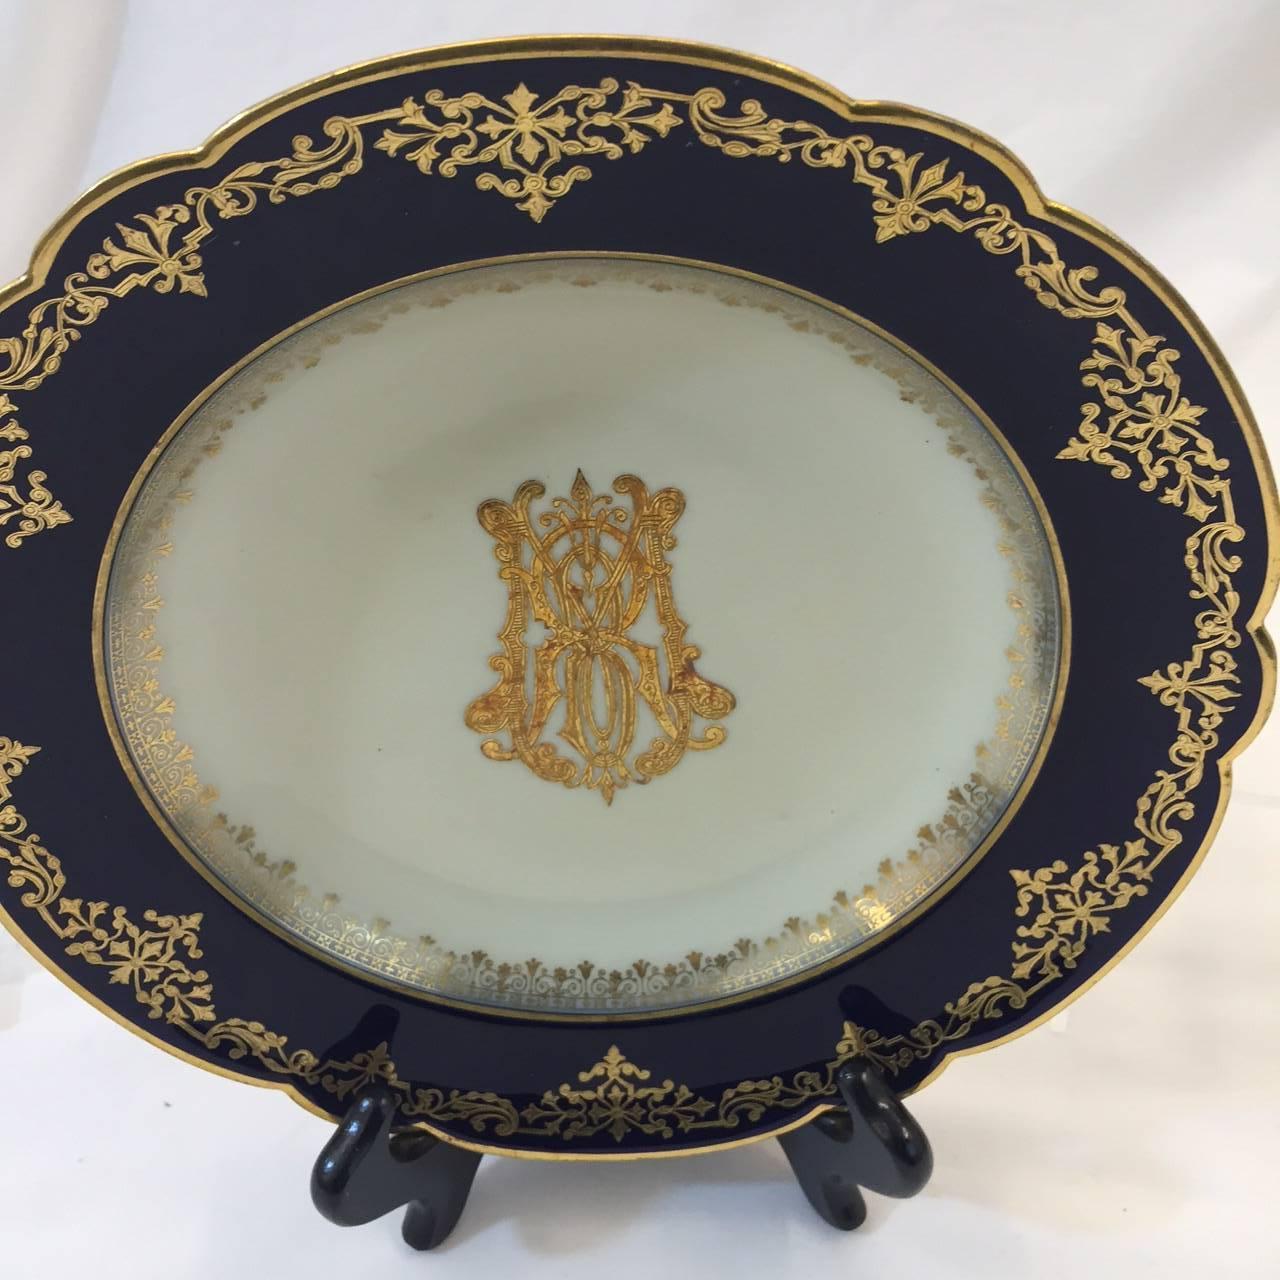 Set of five French dinner plates or bowls made by Medailles Dior, 1867-1878. Cobalt blue edge with gold design, and gold crest in centre. Each plate measures nine and three quarter inches and are marked C H Pillivuyt, Paris. All plates are in good